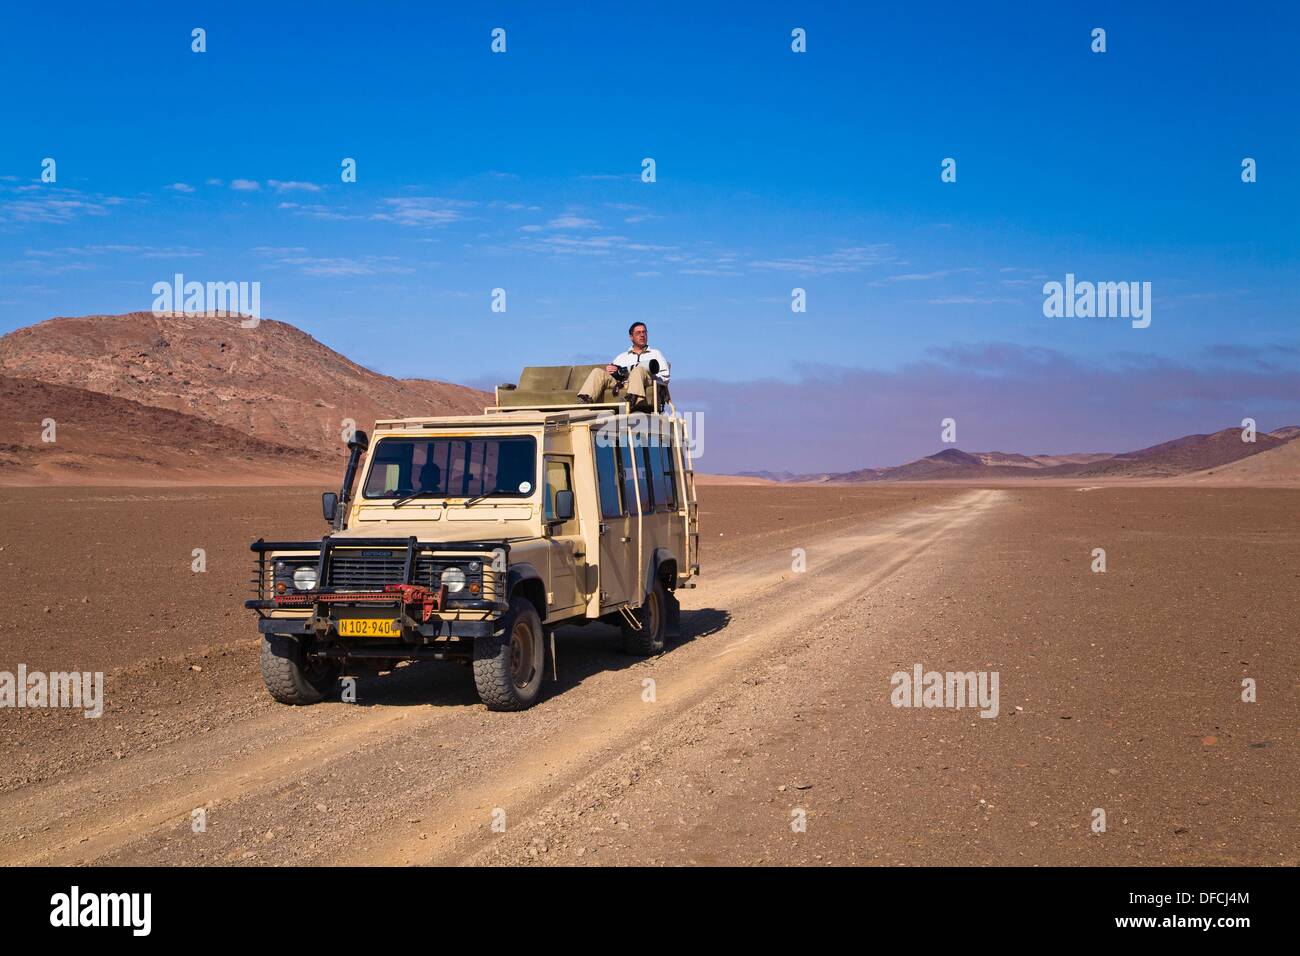 A landrover driving through the isolated Skeleton Coast Park in